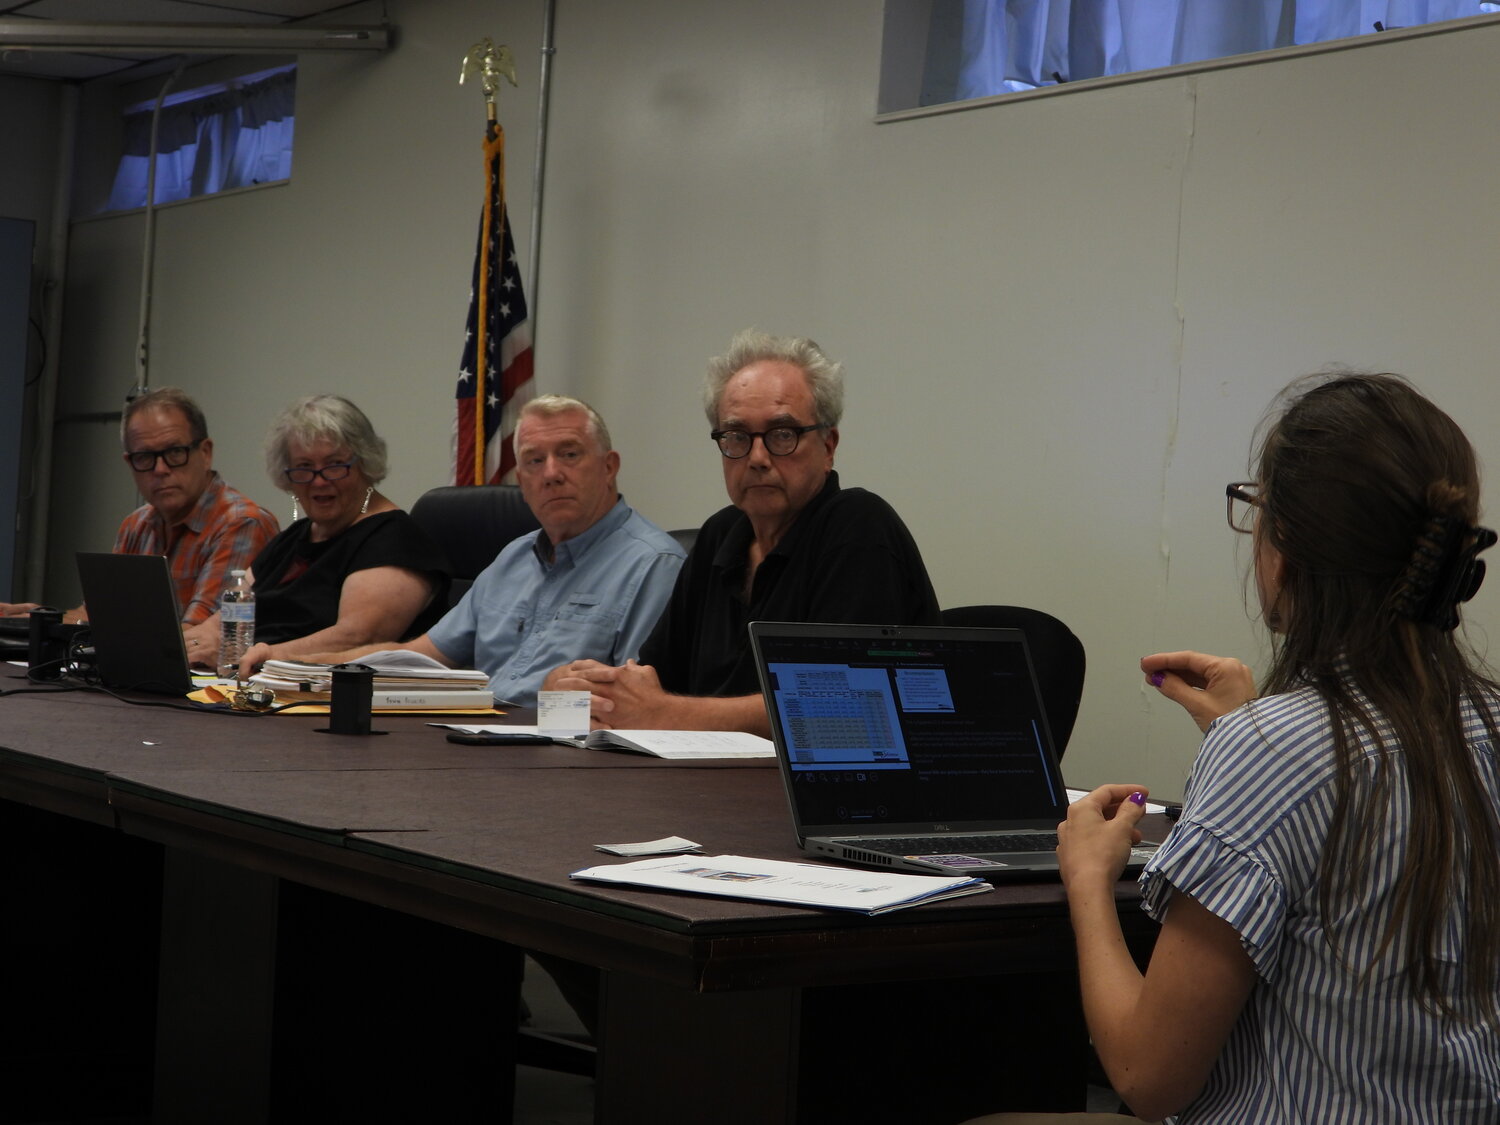 At right, RCAP Solutions Community Specialist Becky Sims breaks down the five options to choose from before the Tusten Town Board regarding possible changes to town water and sewer rates.